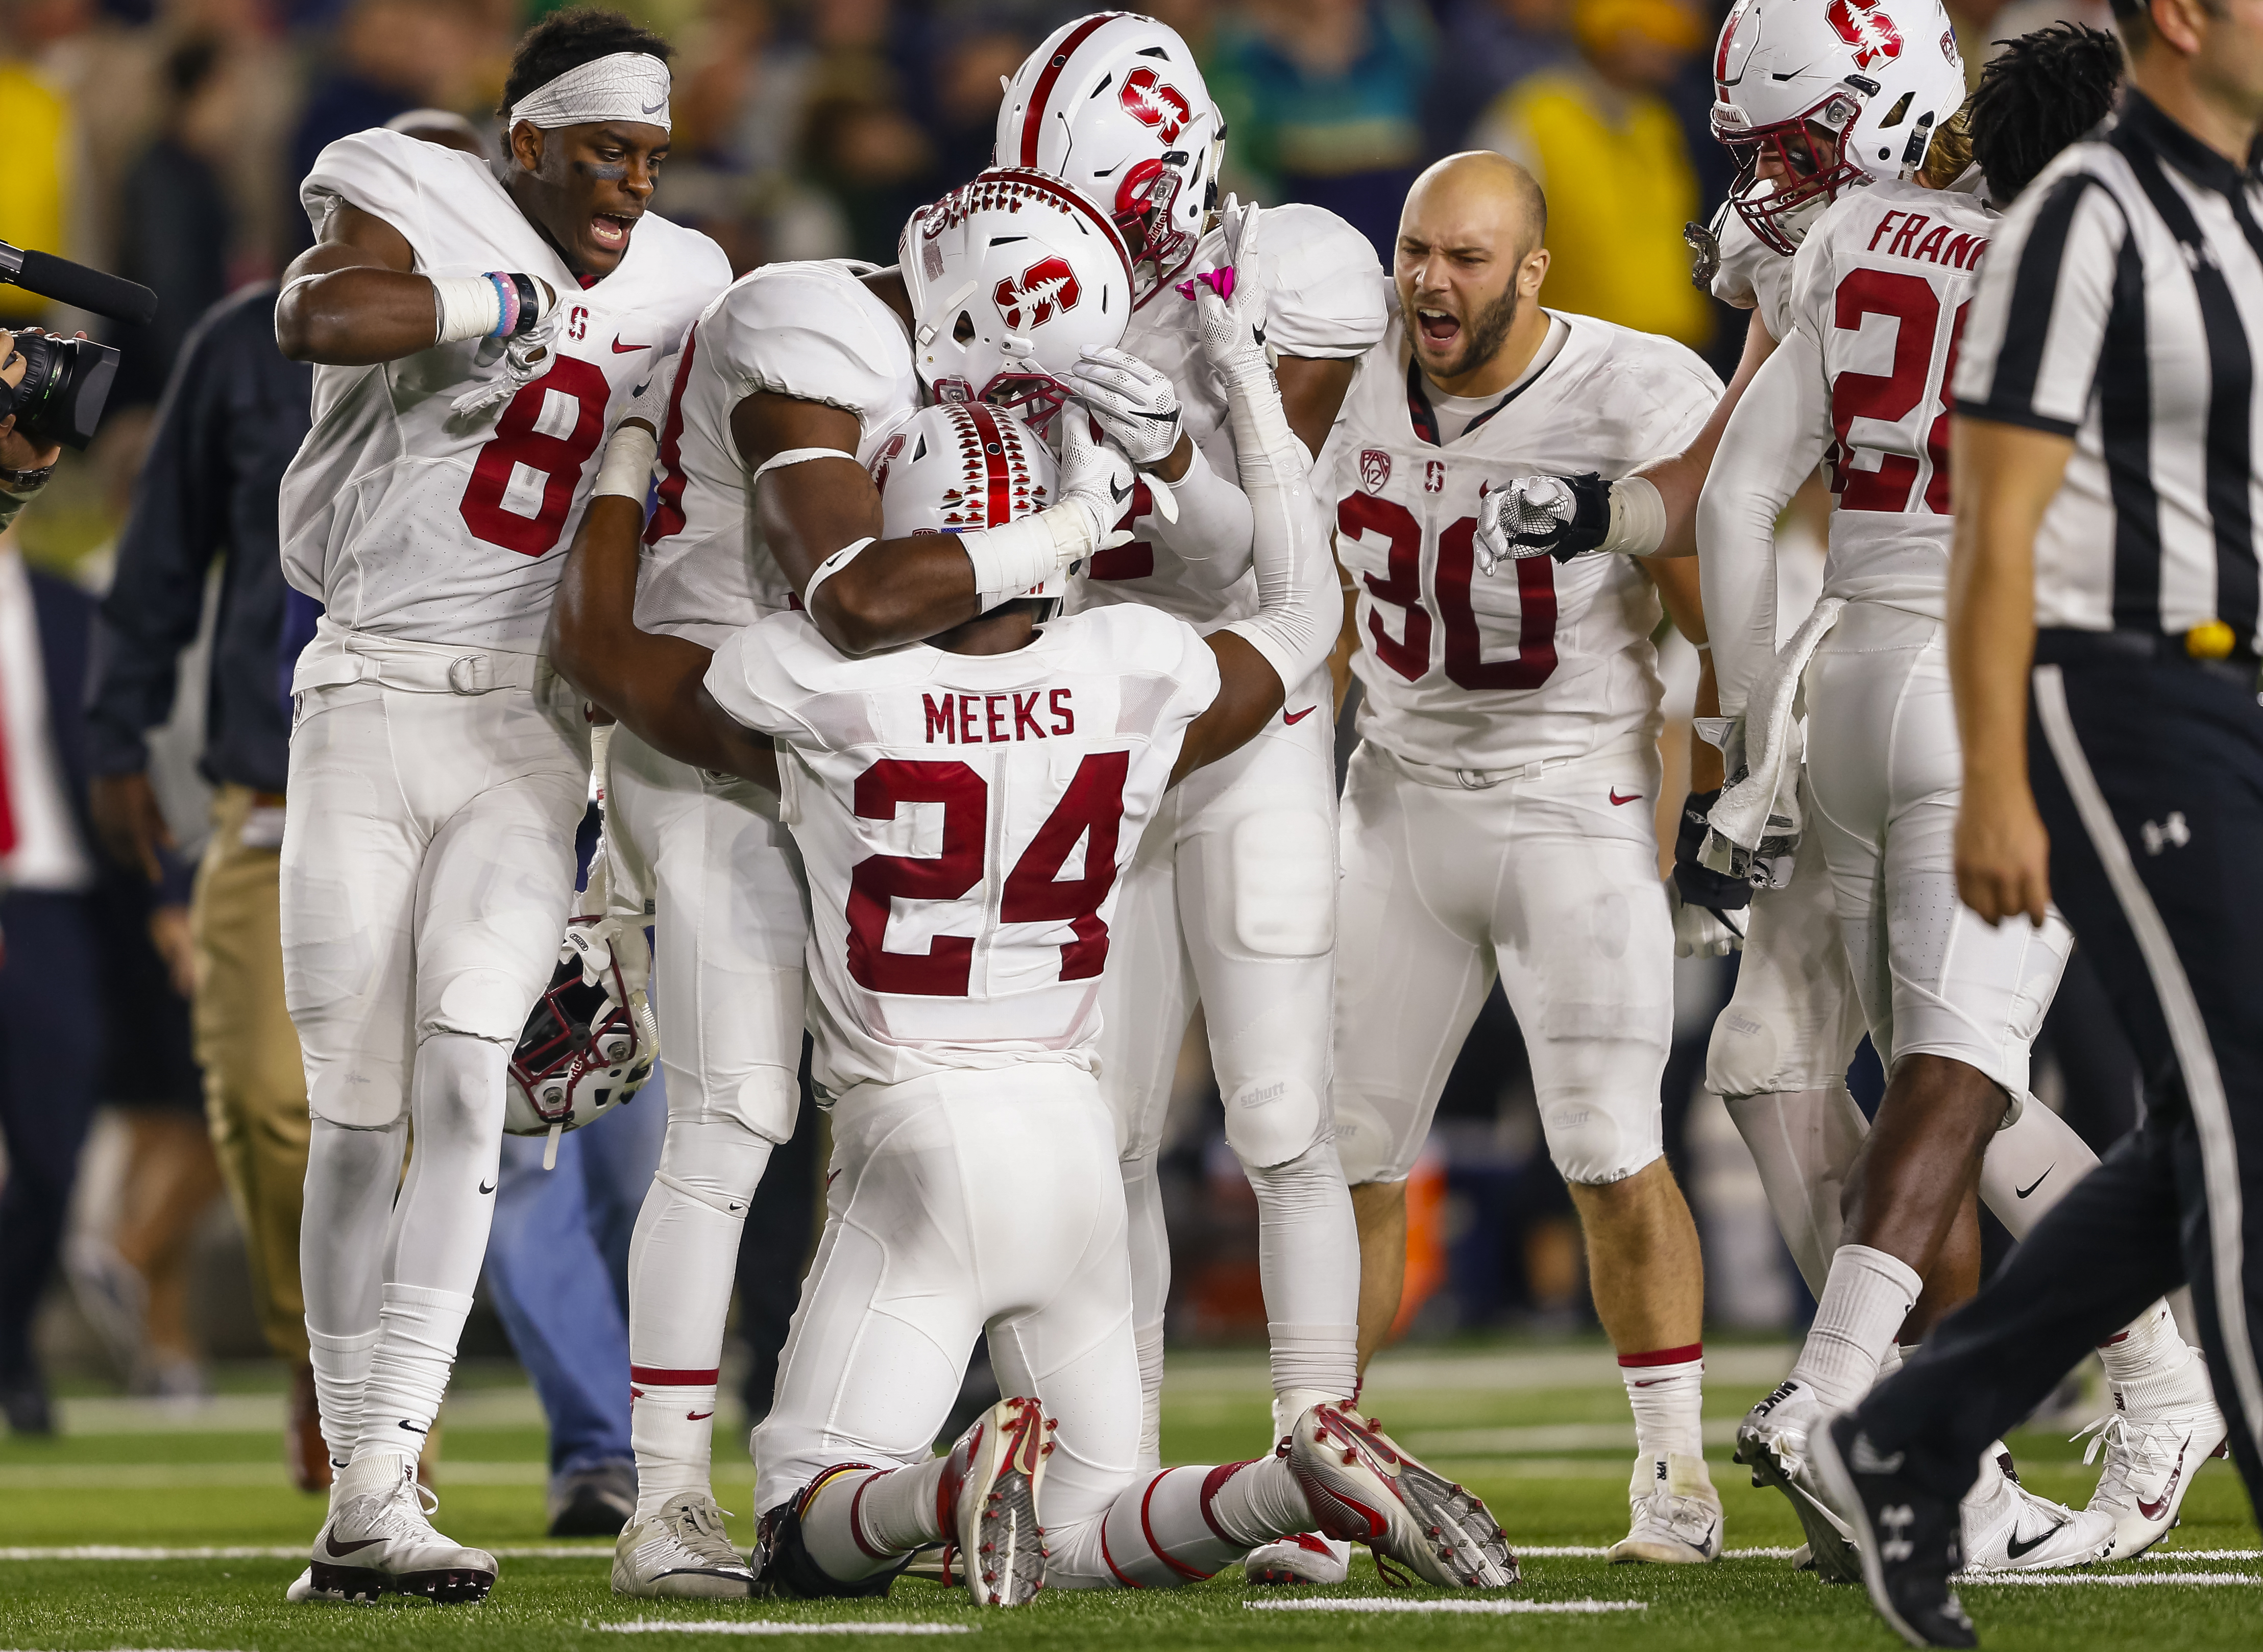 Members of the Stanford Cardinal celebrate after the game against the Notre Dame Fighting Irish at Notre Dame Stadium on Oct. 15, 2016 in South Bend, Indiana. (Michael Hickey—Getty Images)